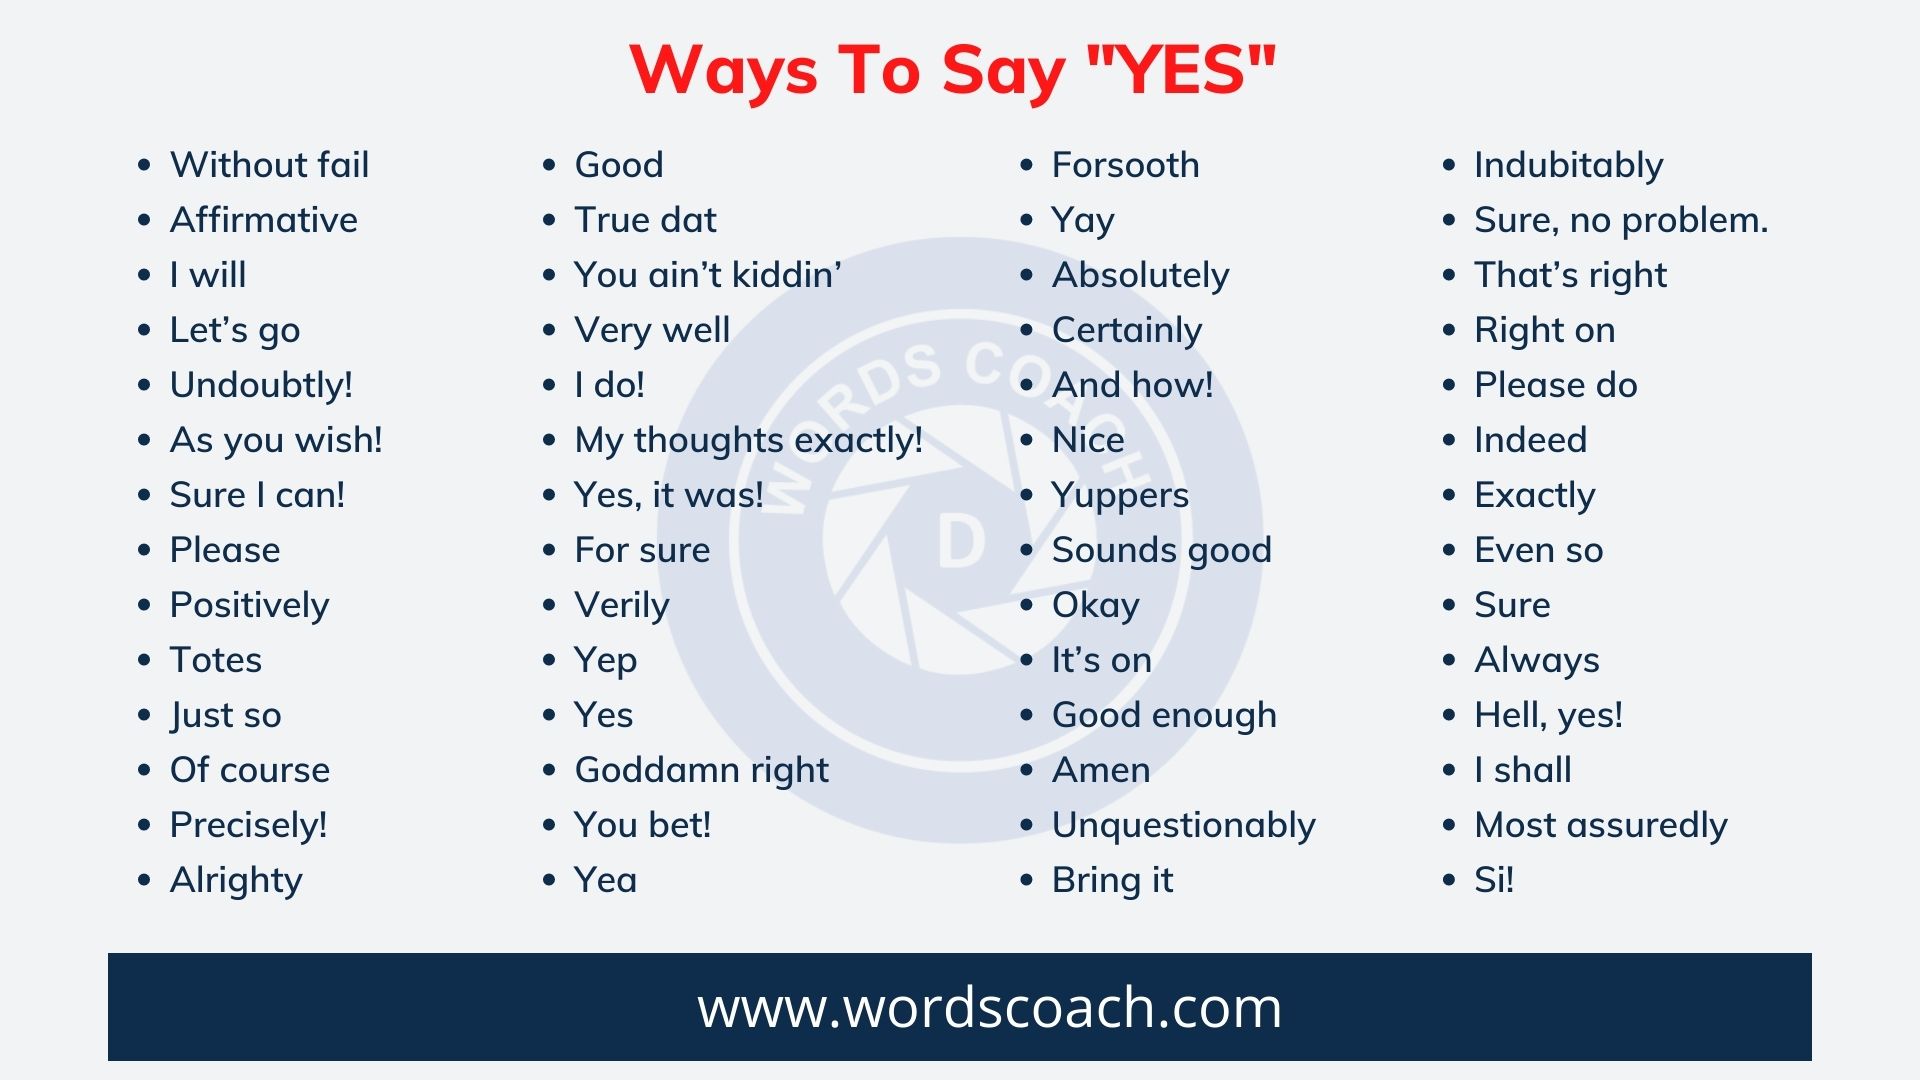 Ways To Say "YES"